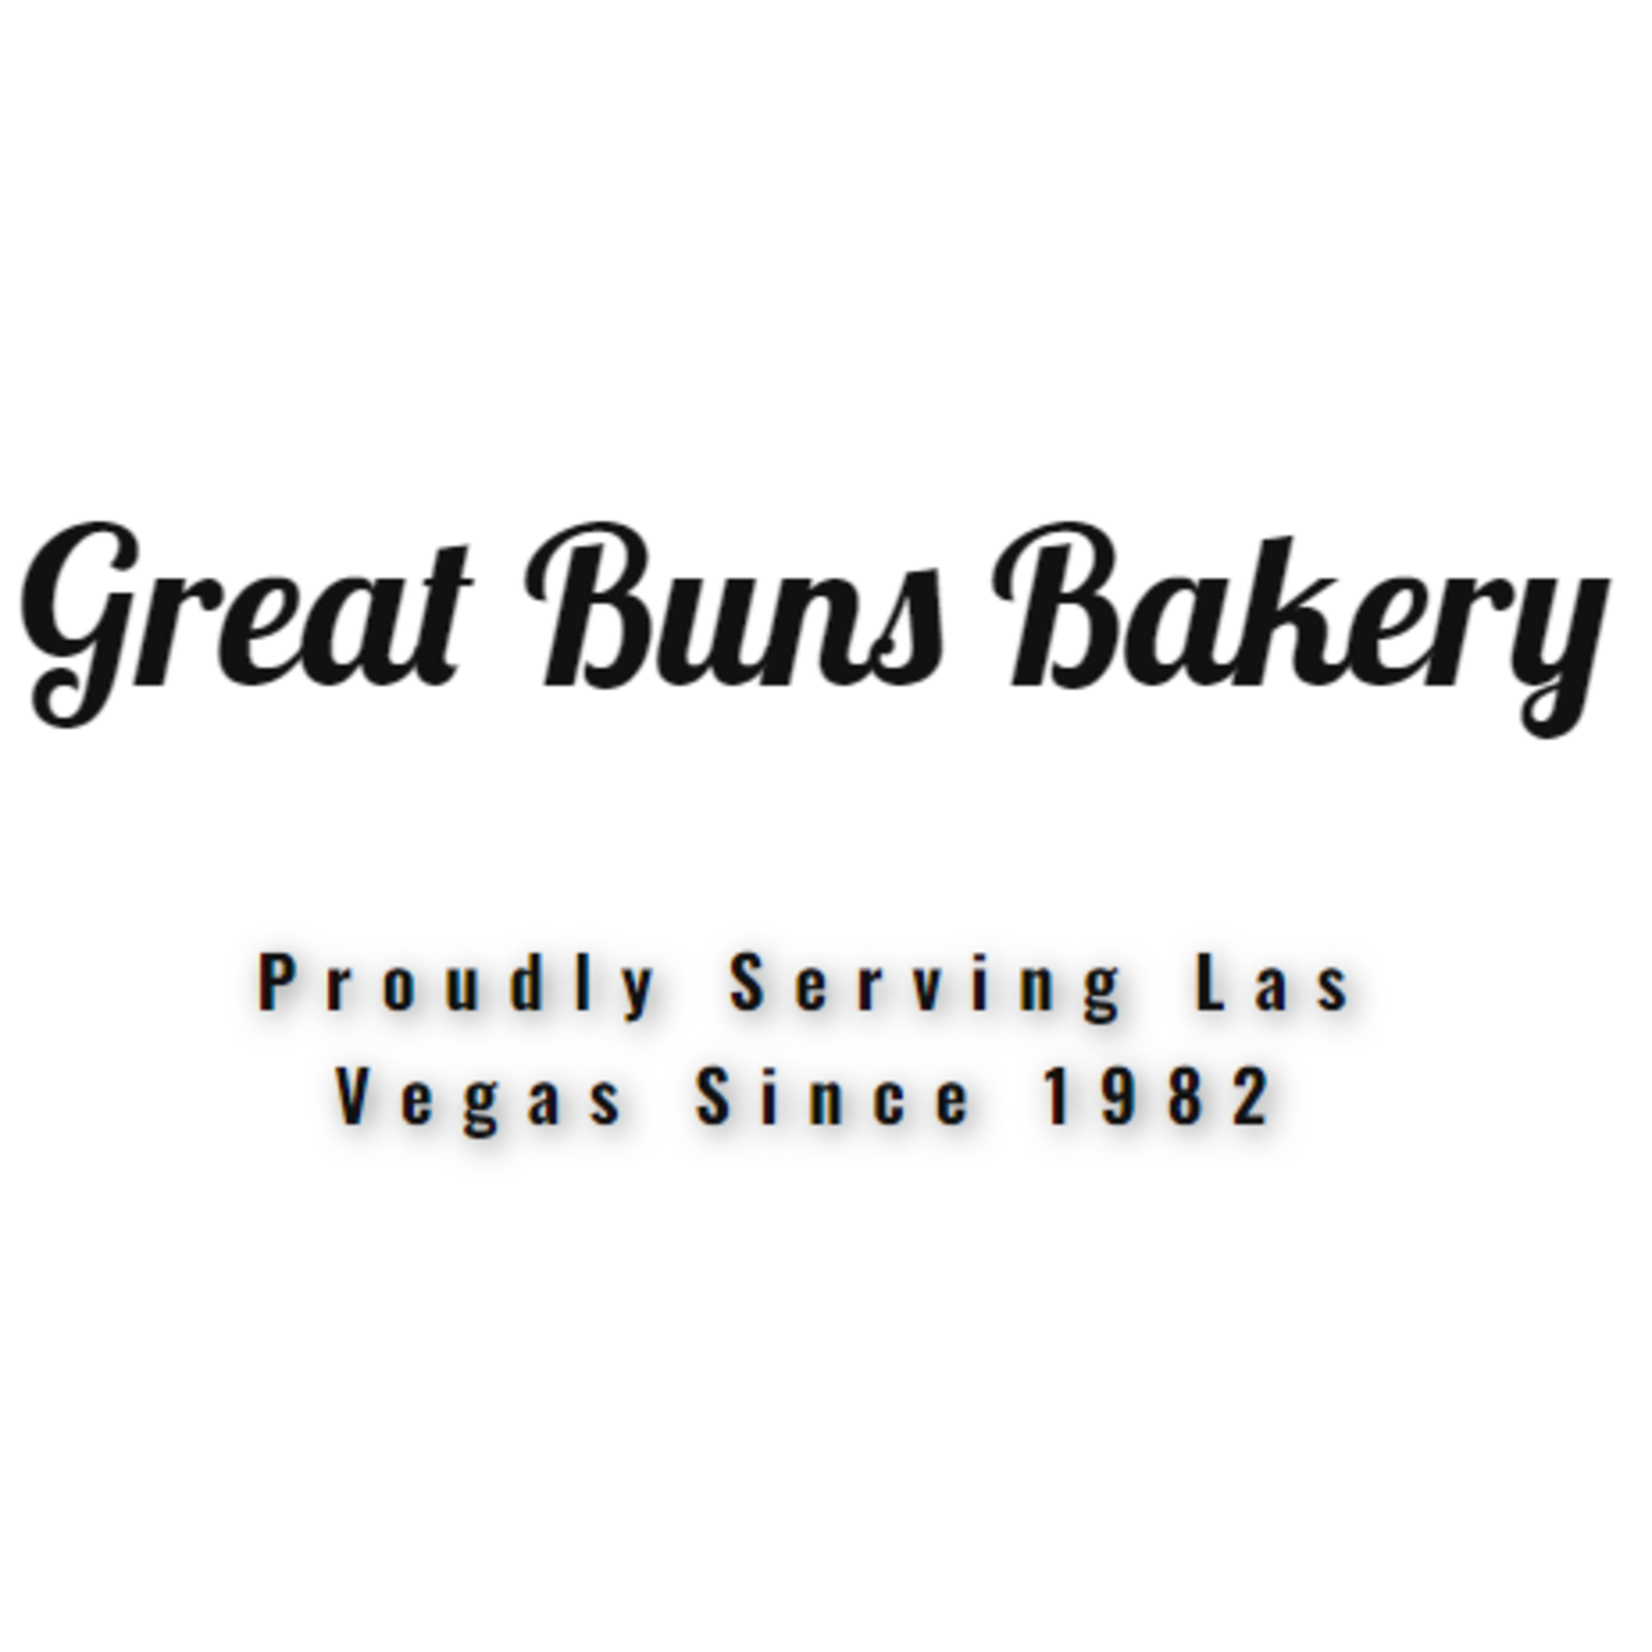 Great Buns Bakery - East Side Only Great Buns Bakery - East Side Only $10 - Menu Items